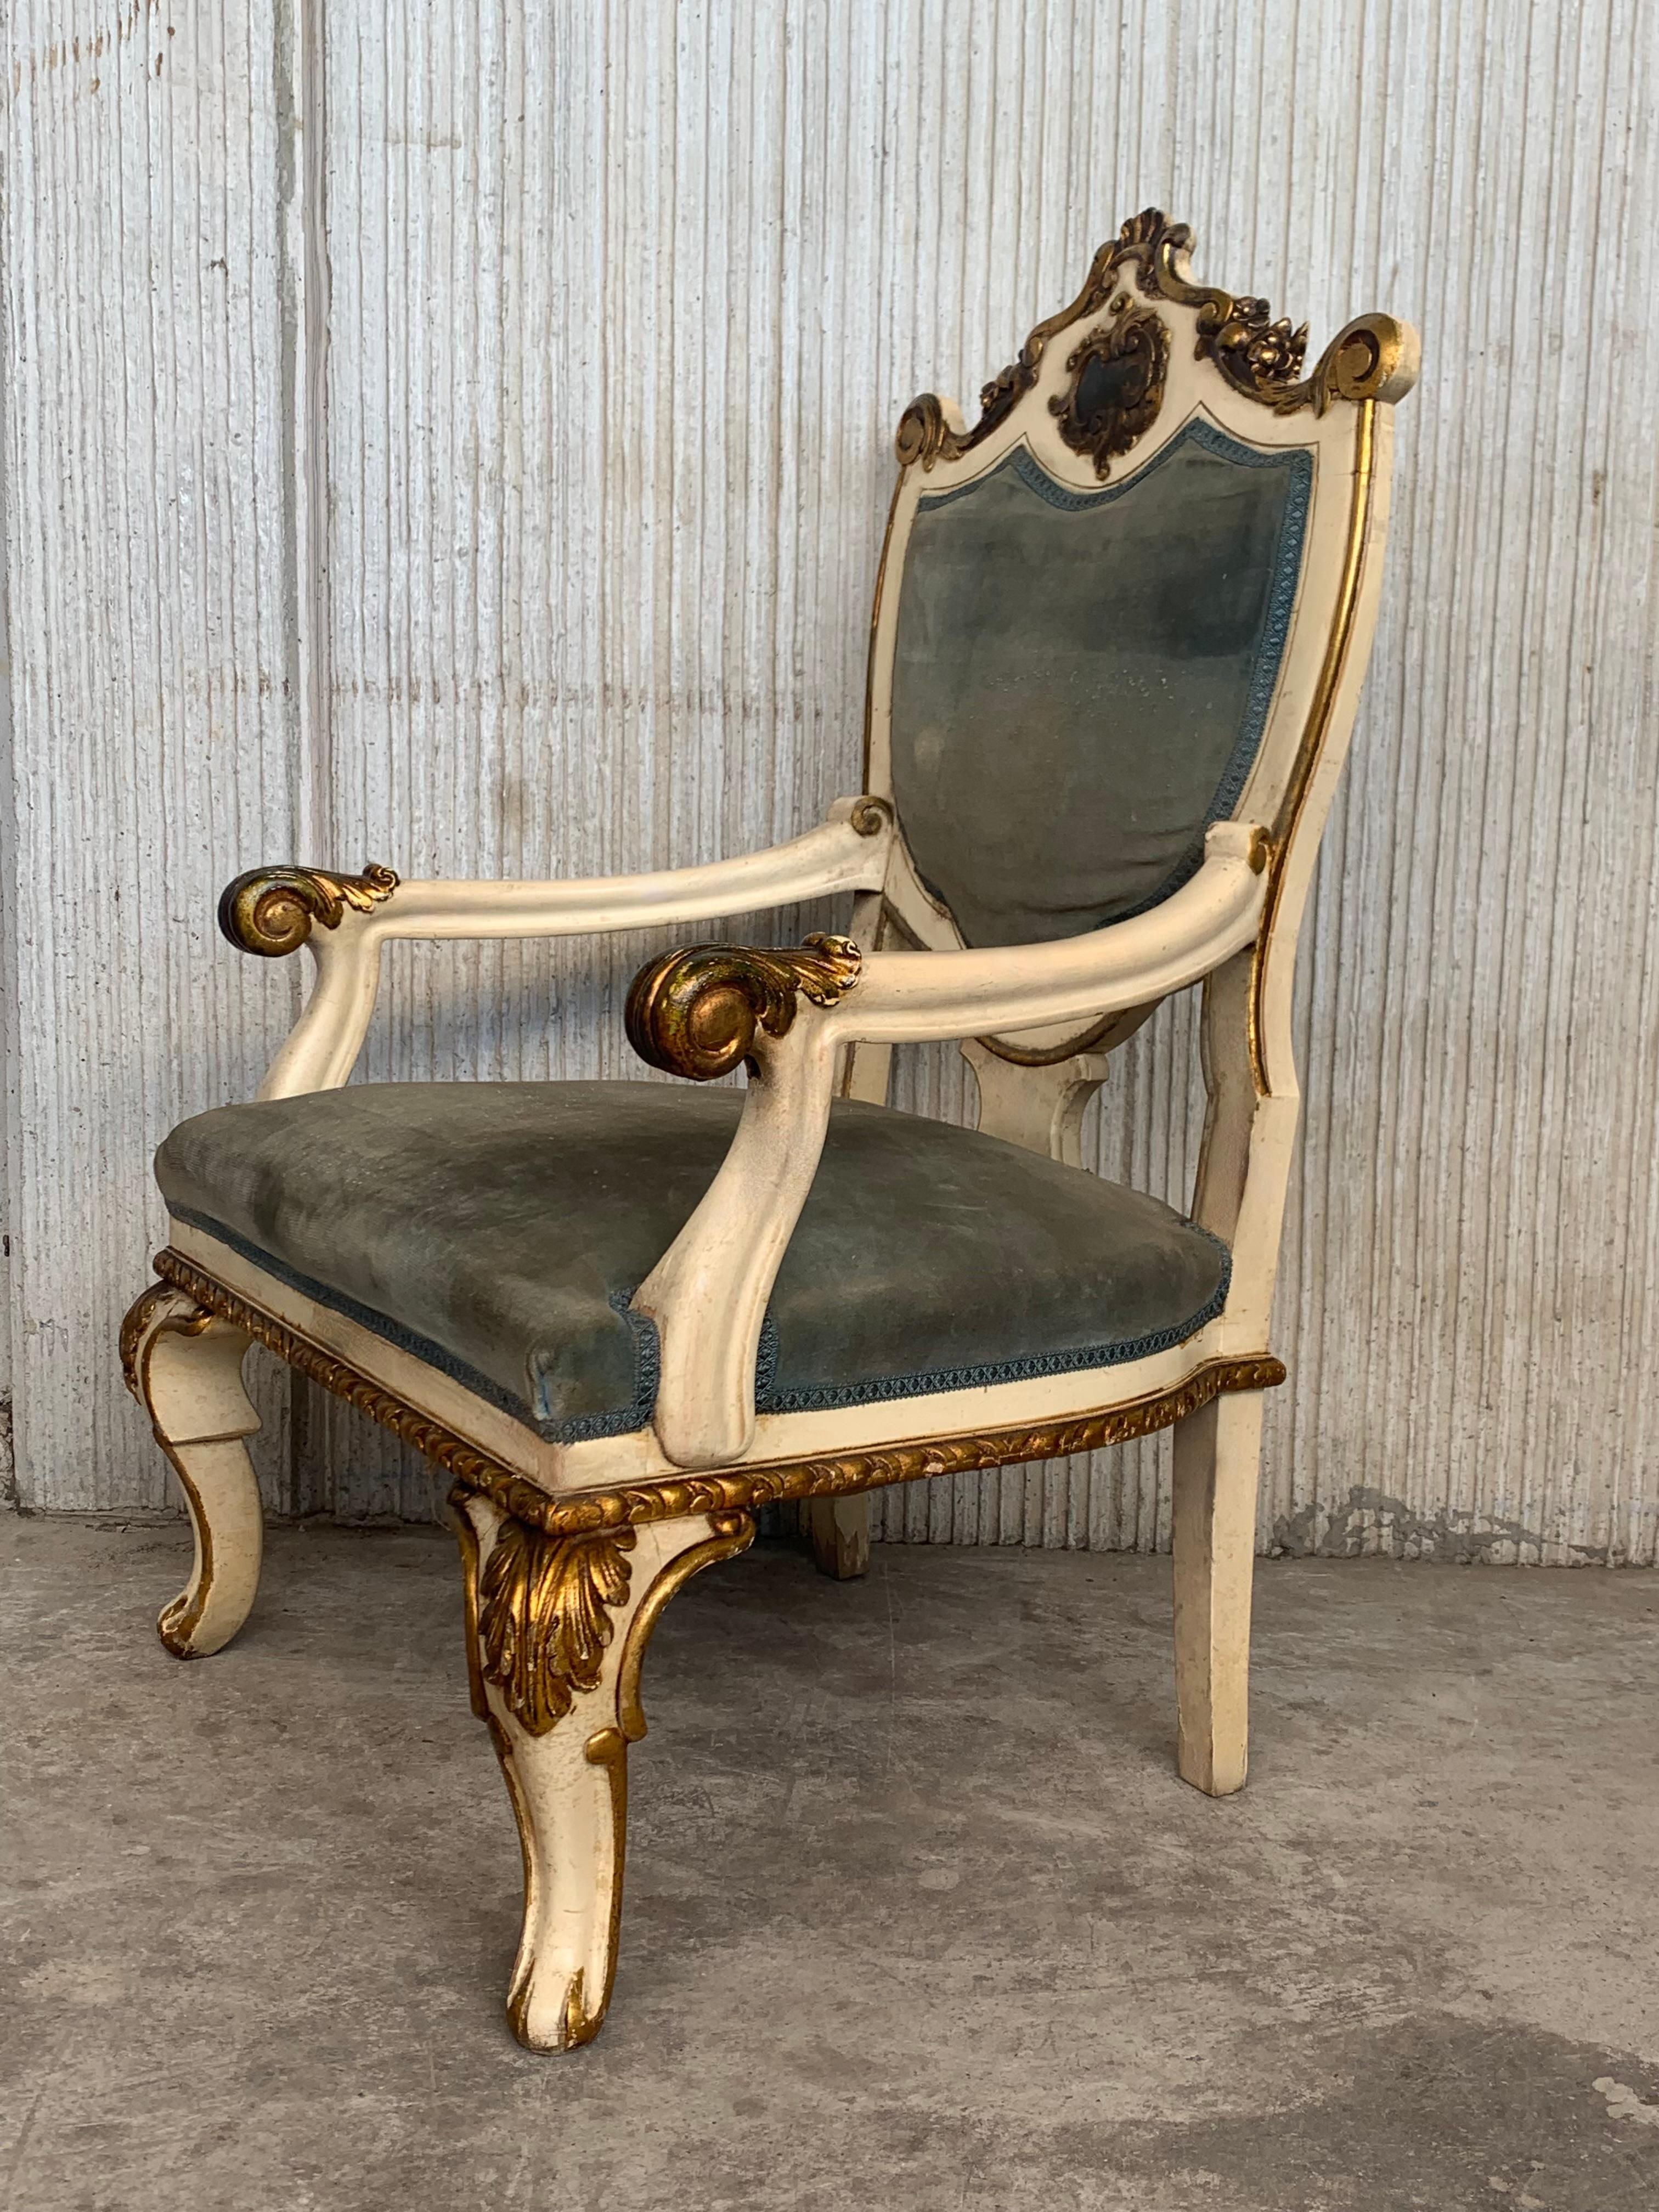 Pair of Venetian hand painted armchairs in white antique painting and giltwood 
Green Velvet in back and seats
Beautiful hand paintings in both backs.